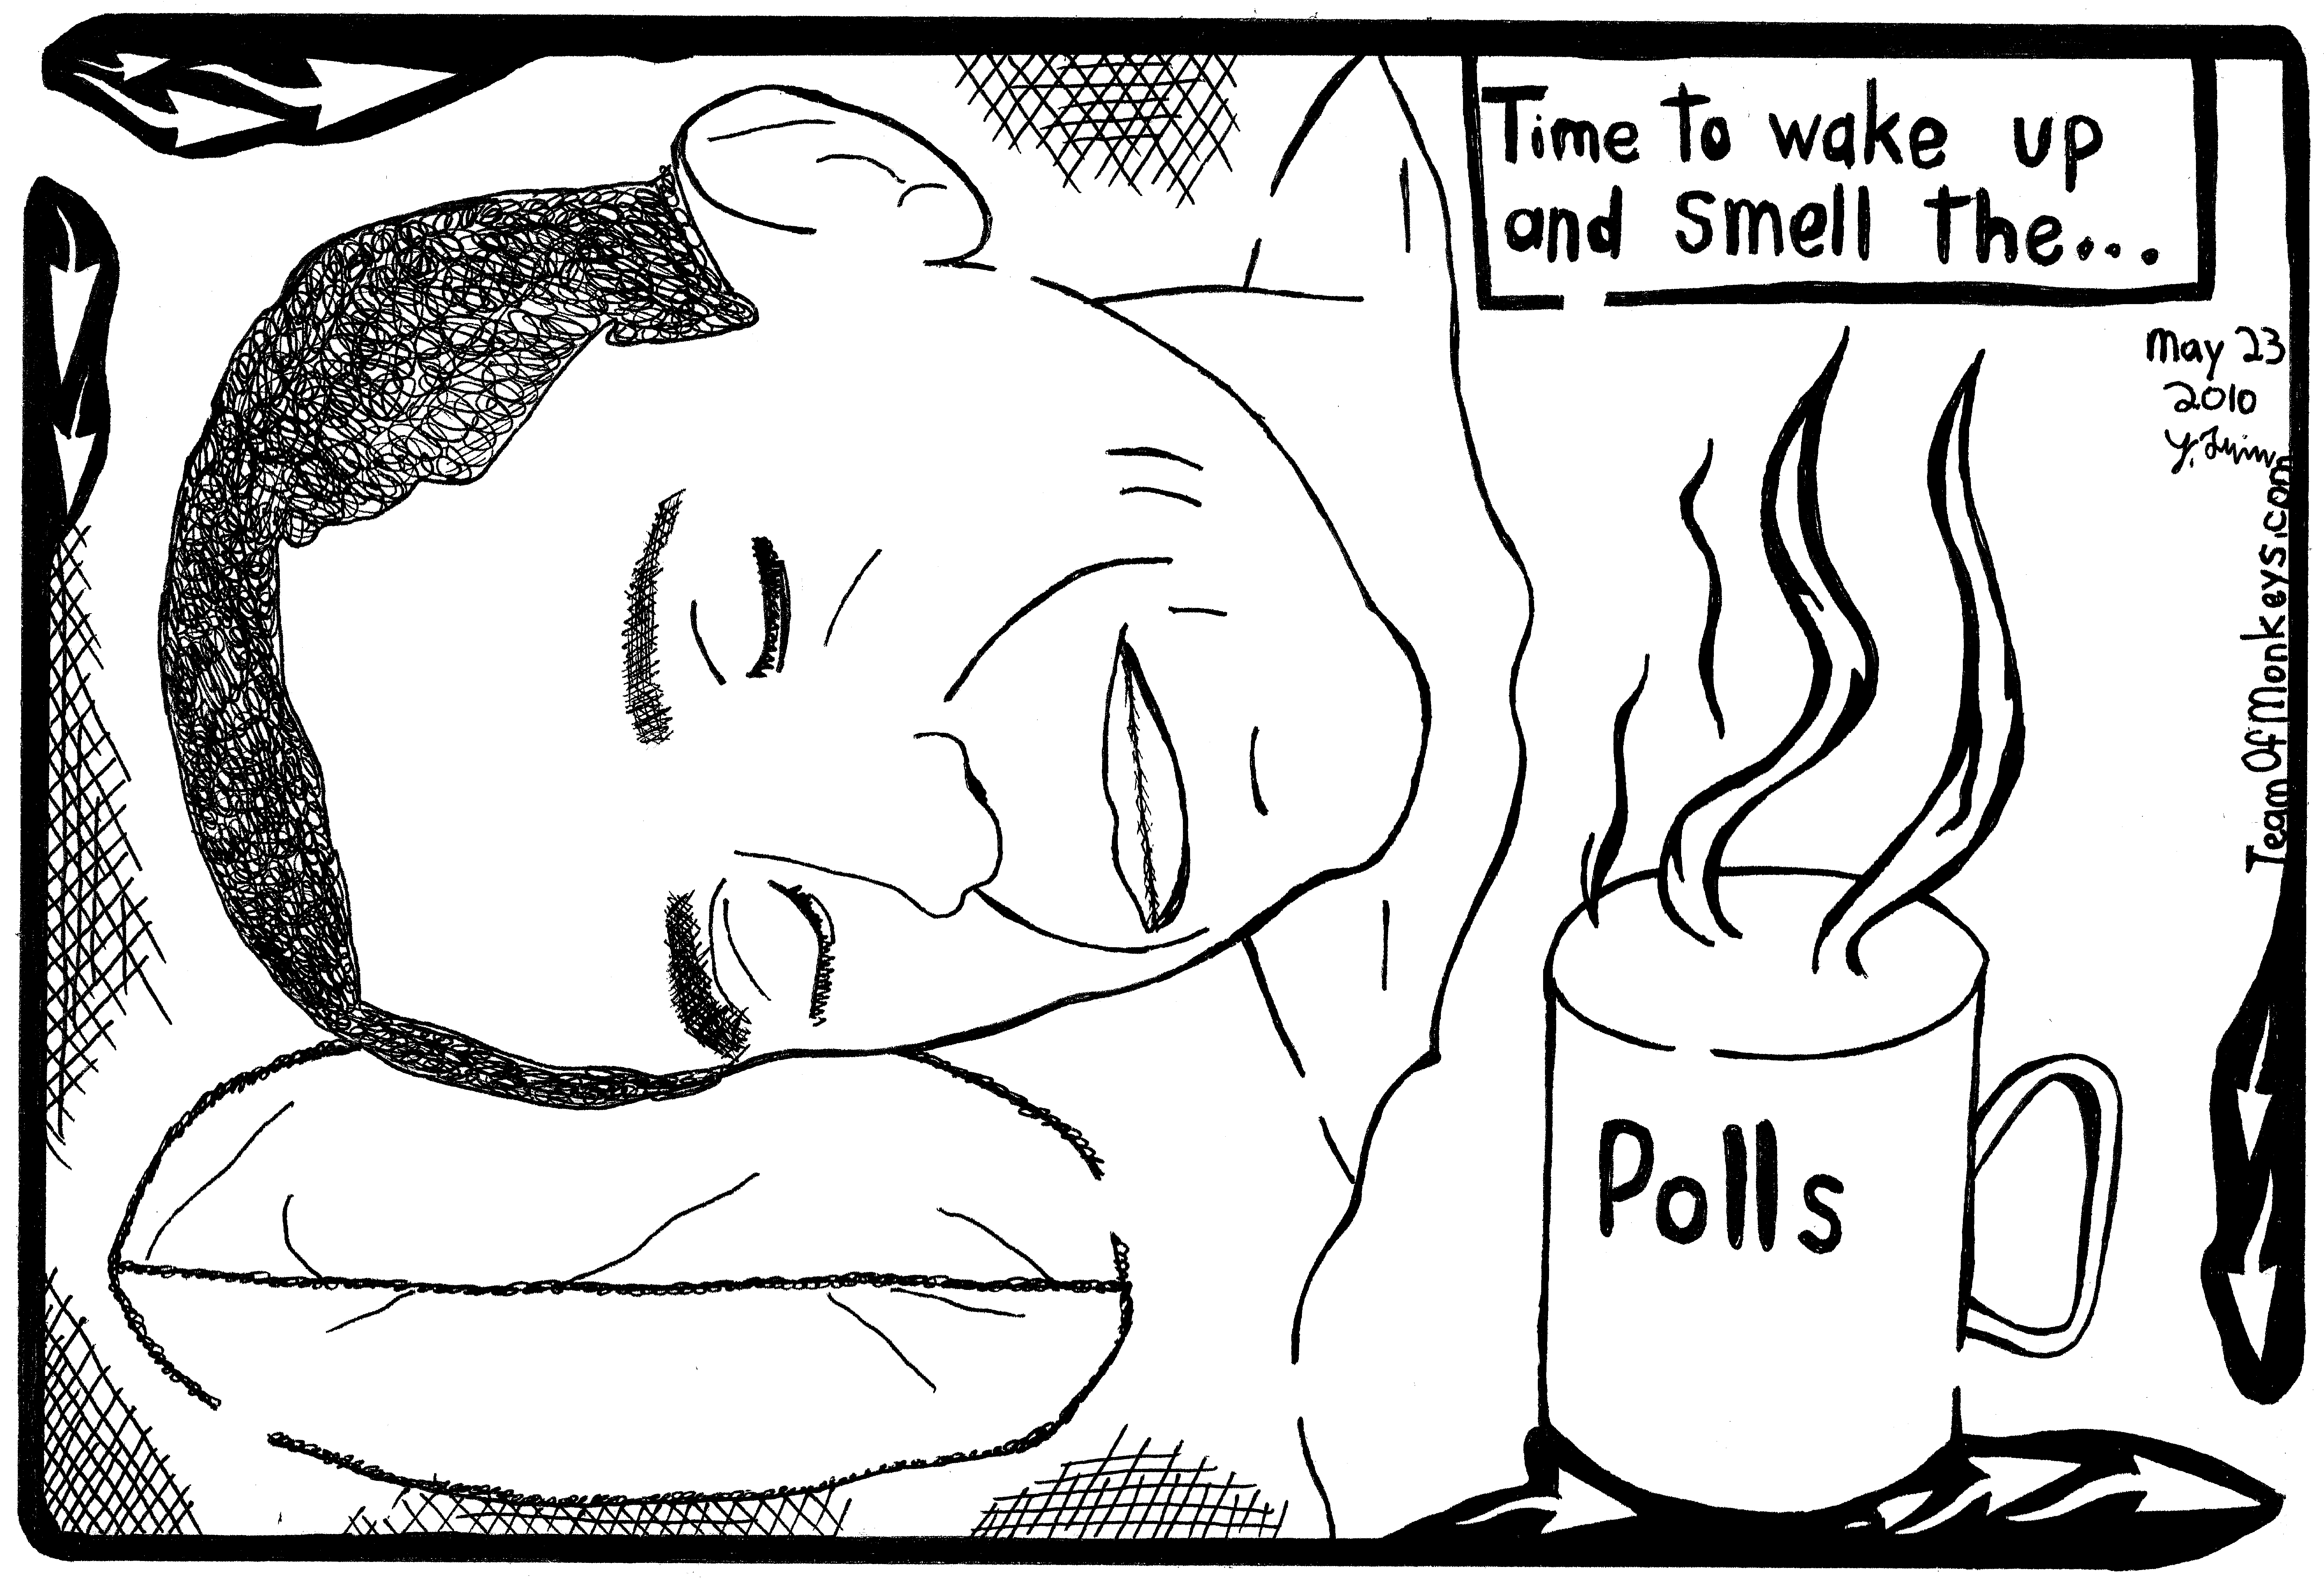 Editorial maze cartoon of Obama sleeping and not waking up to 